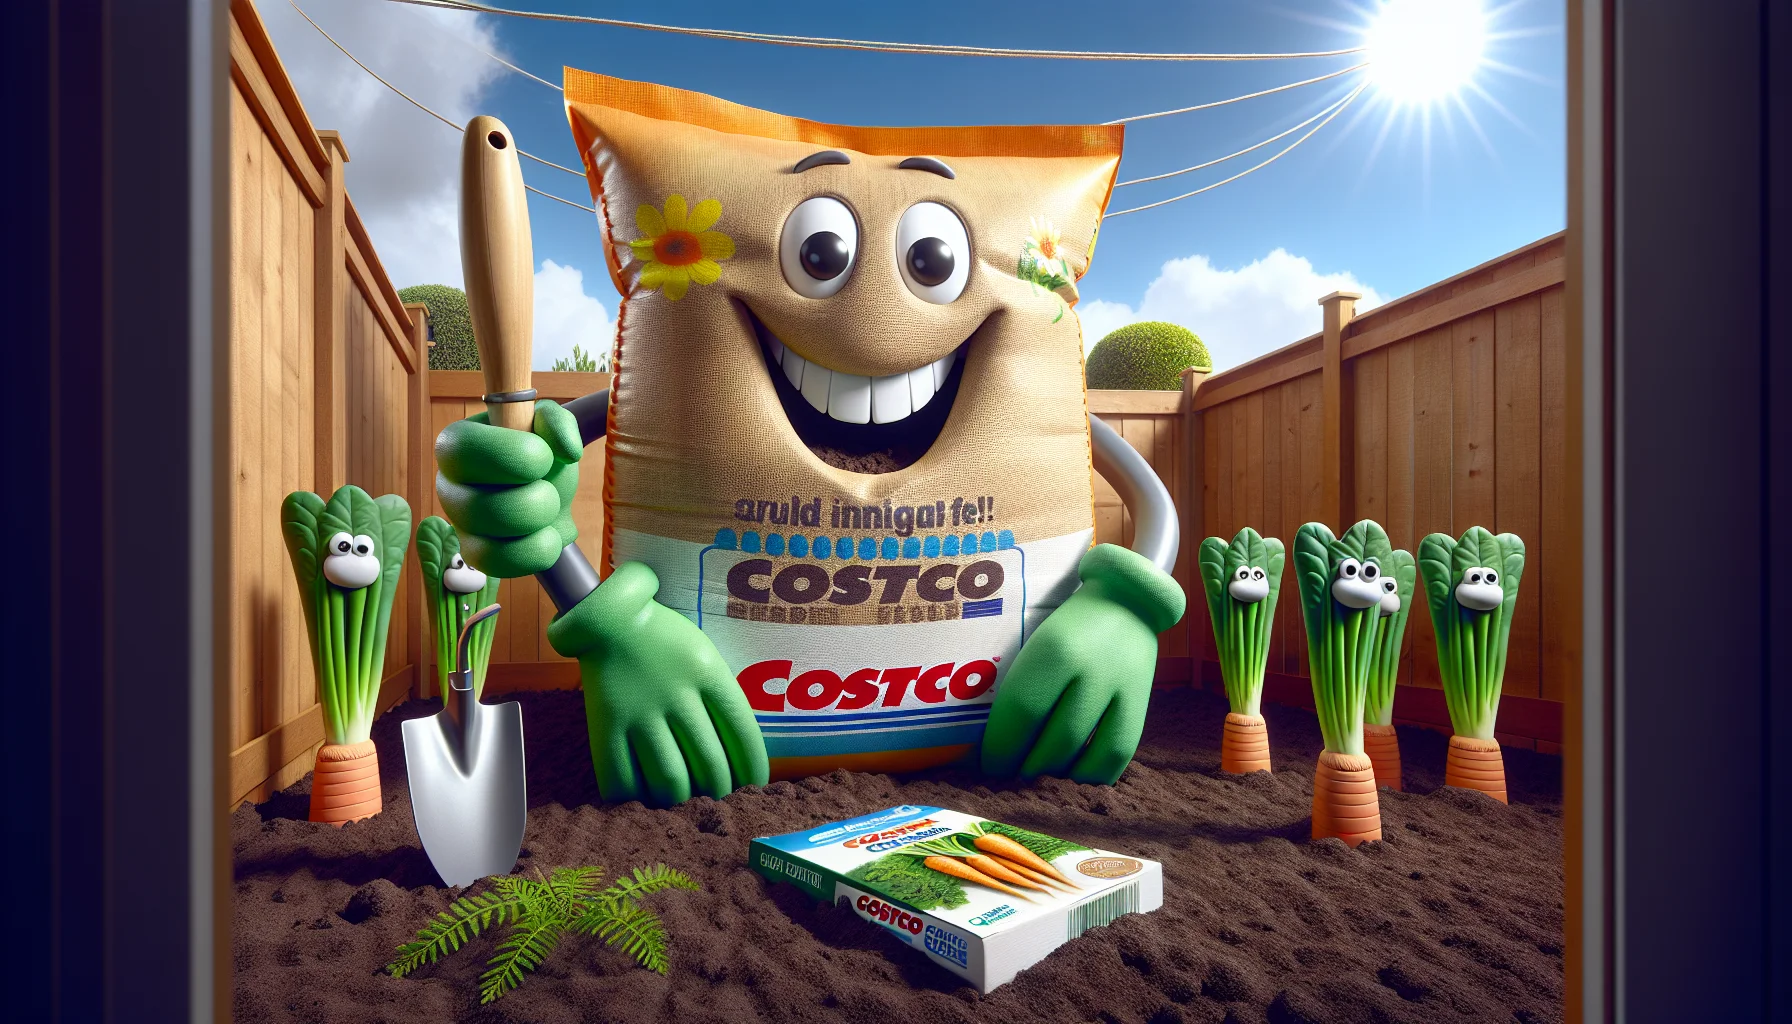 An amusing scene is set in an imaginary backyard garden featuring an oversized bag of Costco garden soil as the star attraction. The bag is playfully animated with a charismatic smiling face. Its hands, formed with split seams, grasp a hand trowel and a packet of carrot seeds. Behind it, a row of green plants with expressive faces, eagerly await the incoming soil. With a blue sky and a shining sun overhead, the scene humorously creates an engaging atmosphere that promotes the idea of joy in gardening.